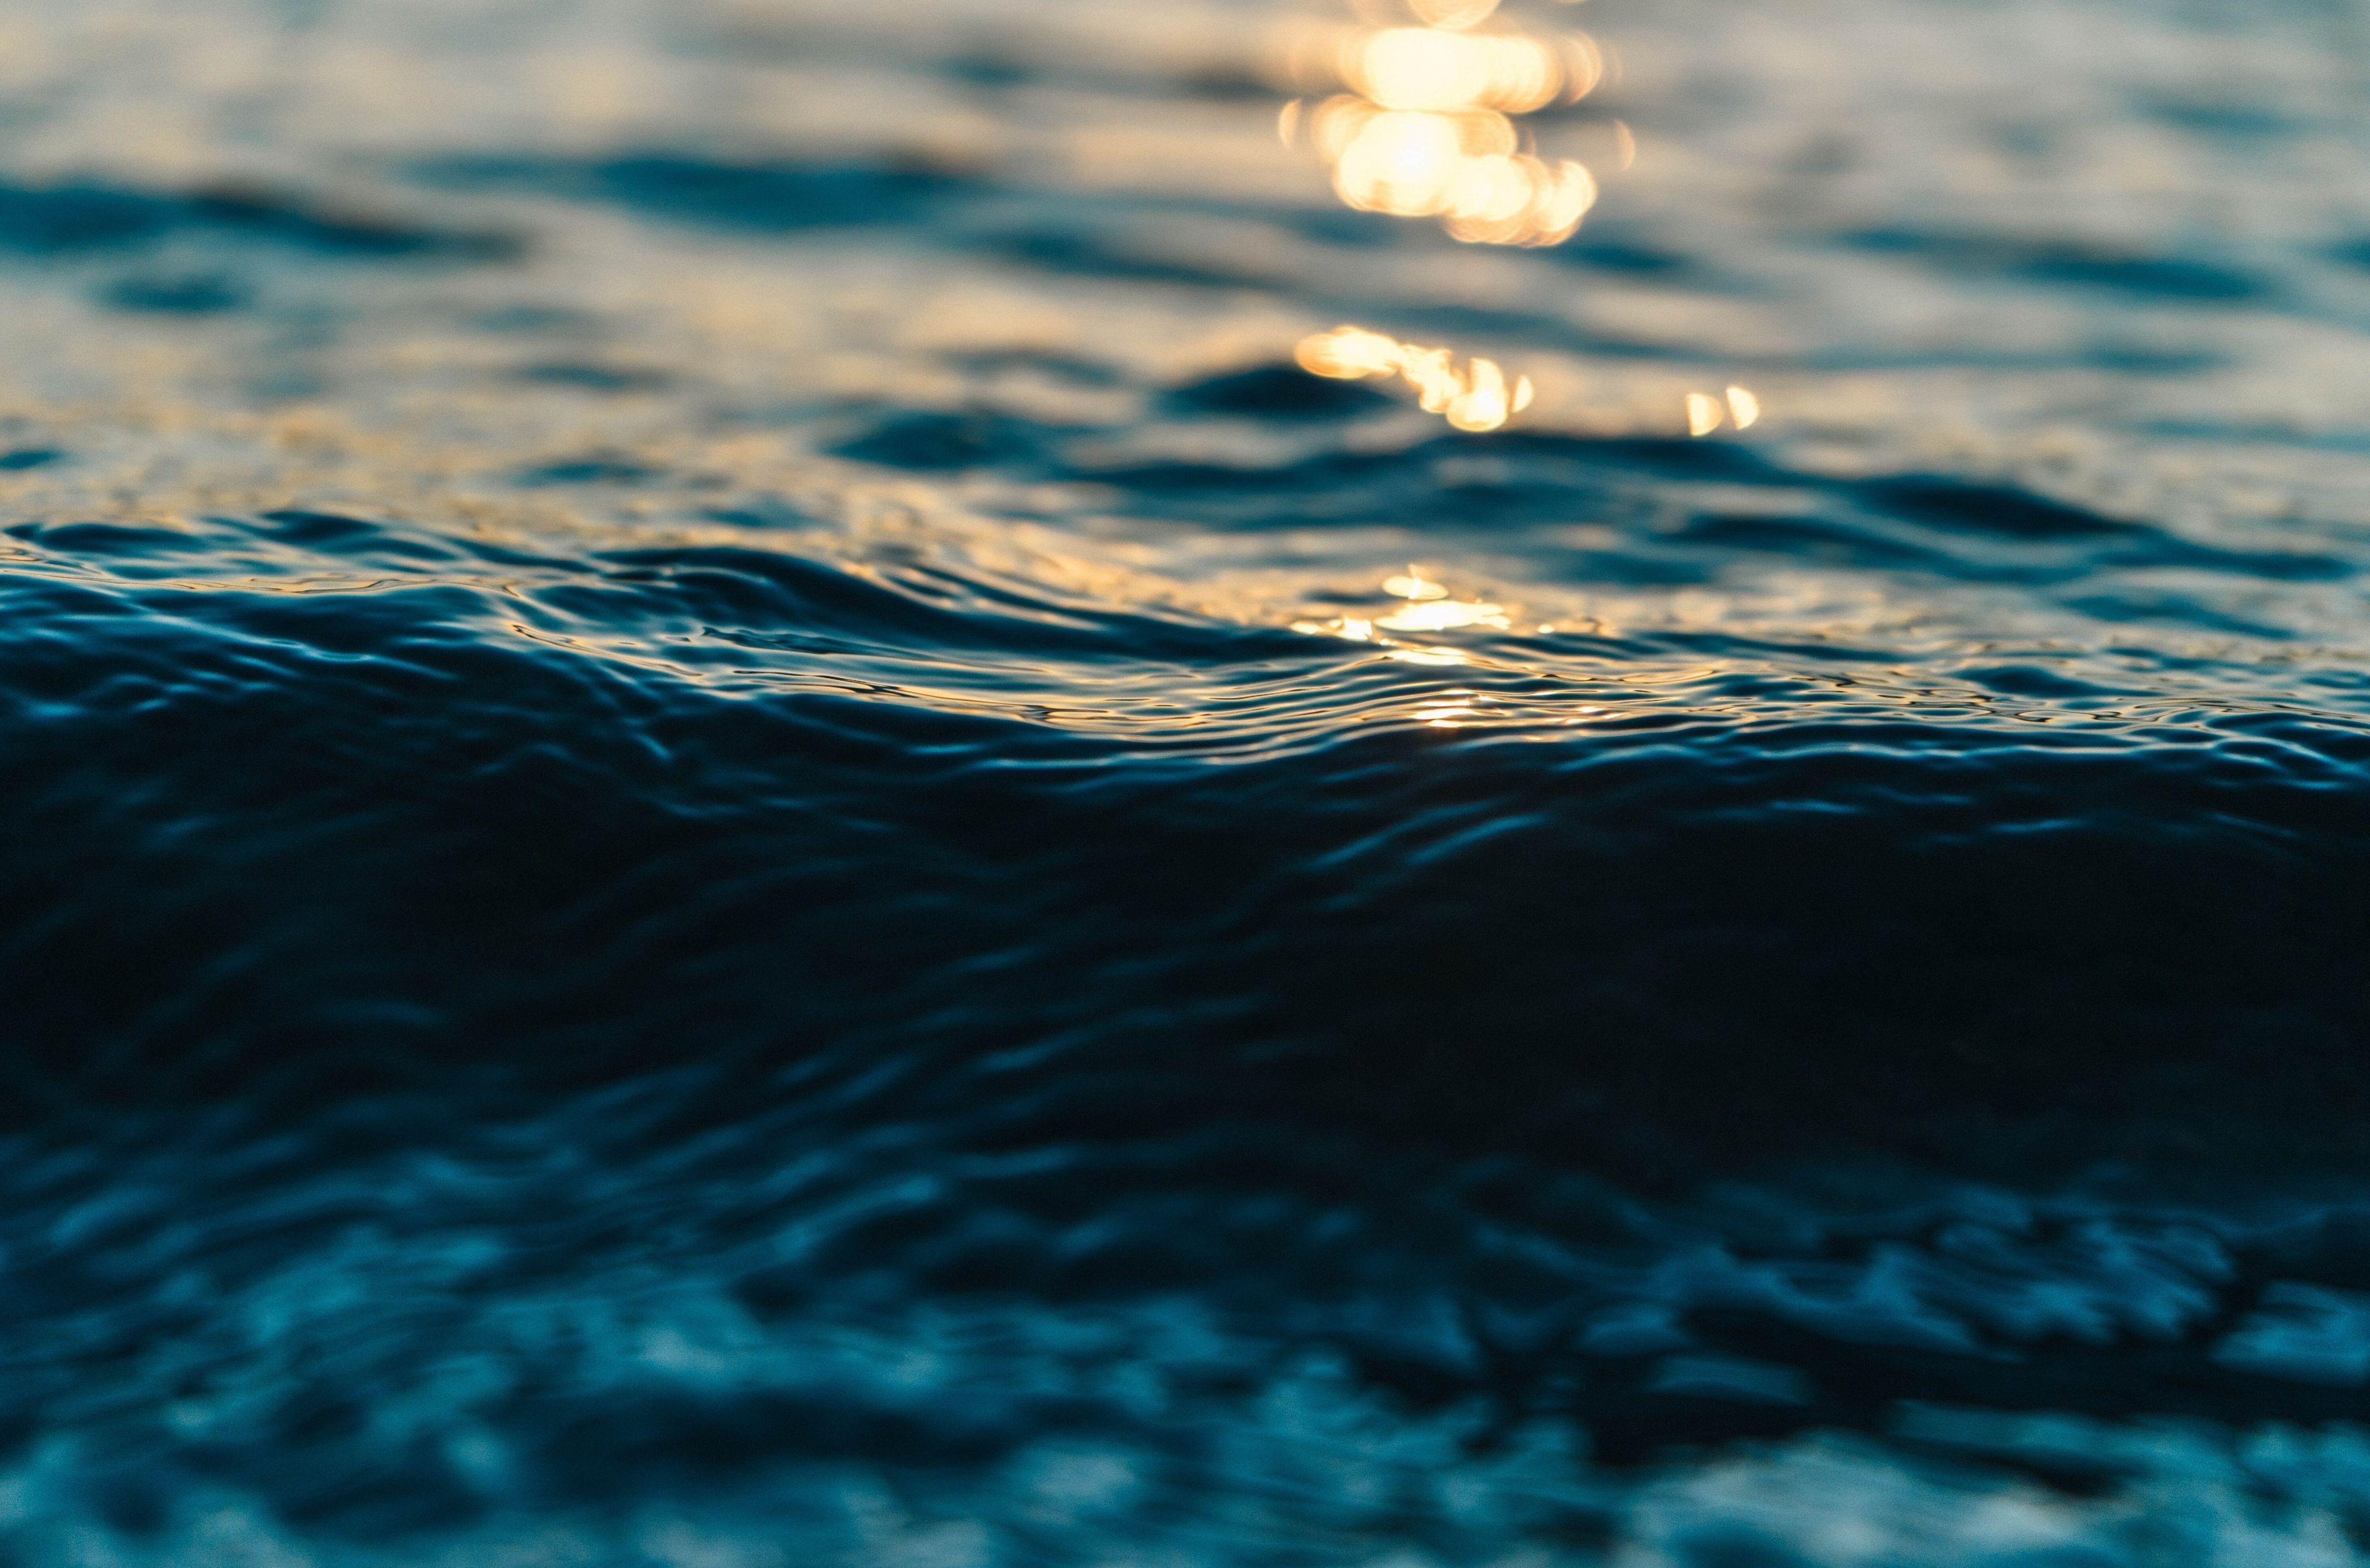 Water 4k Wallpapers Top Free Water 4k Backgrounds Wallpaperaccess 1233